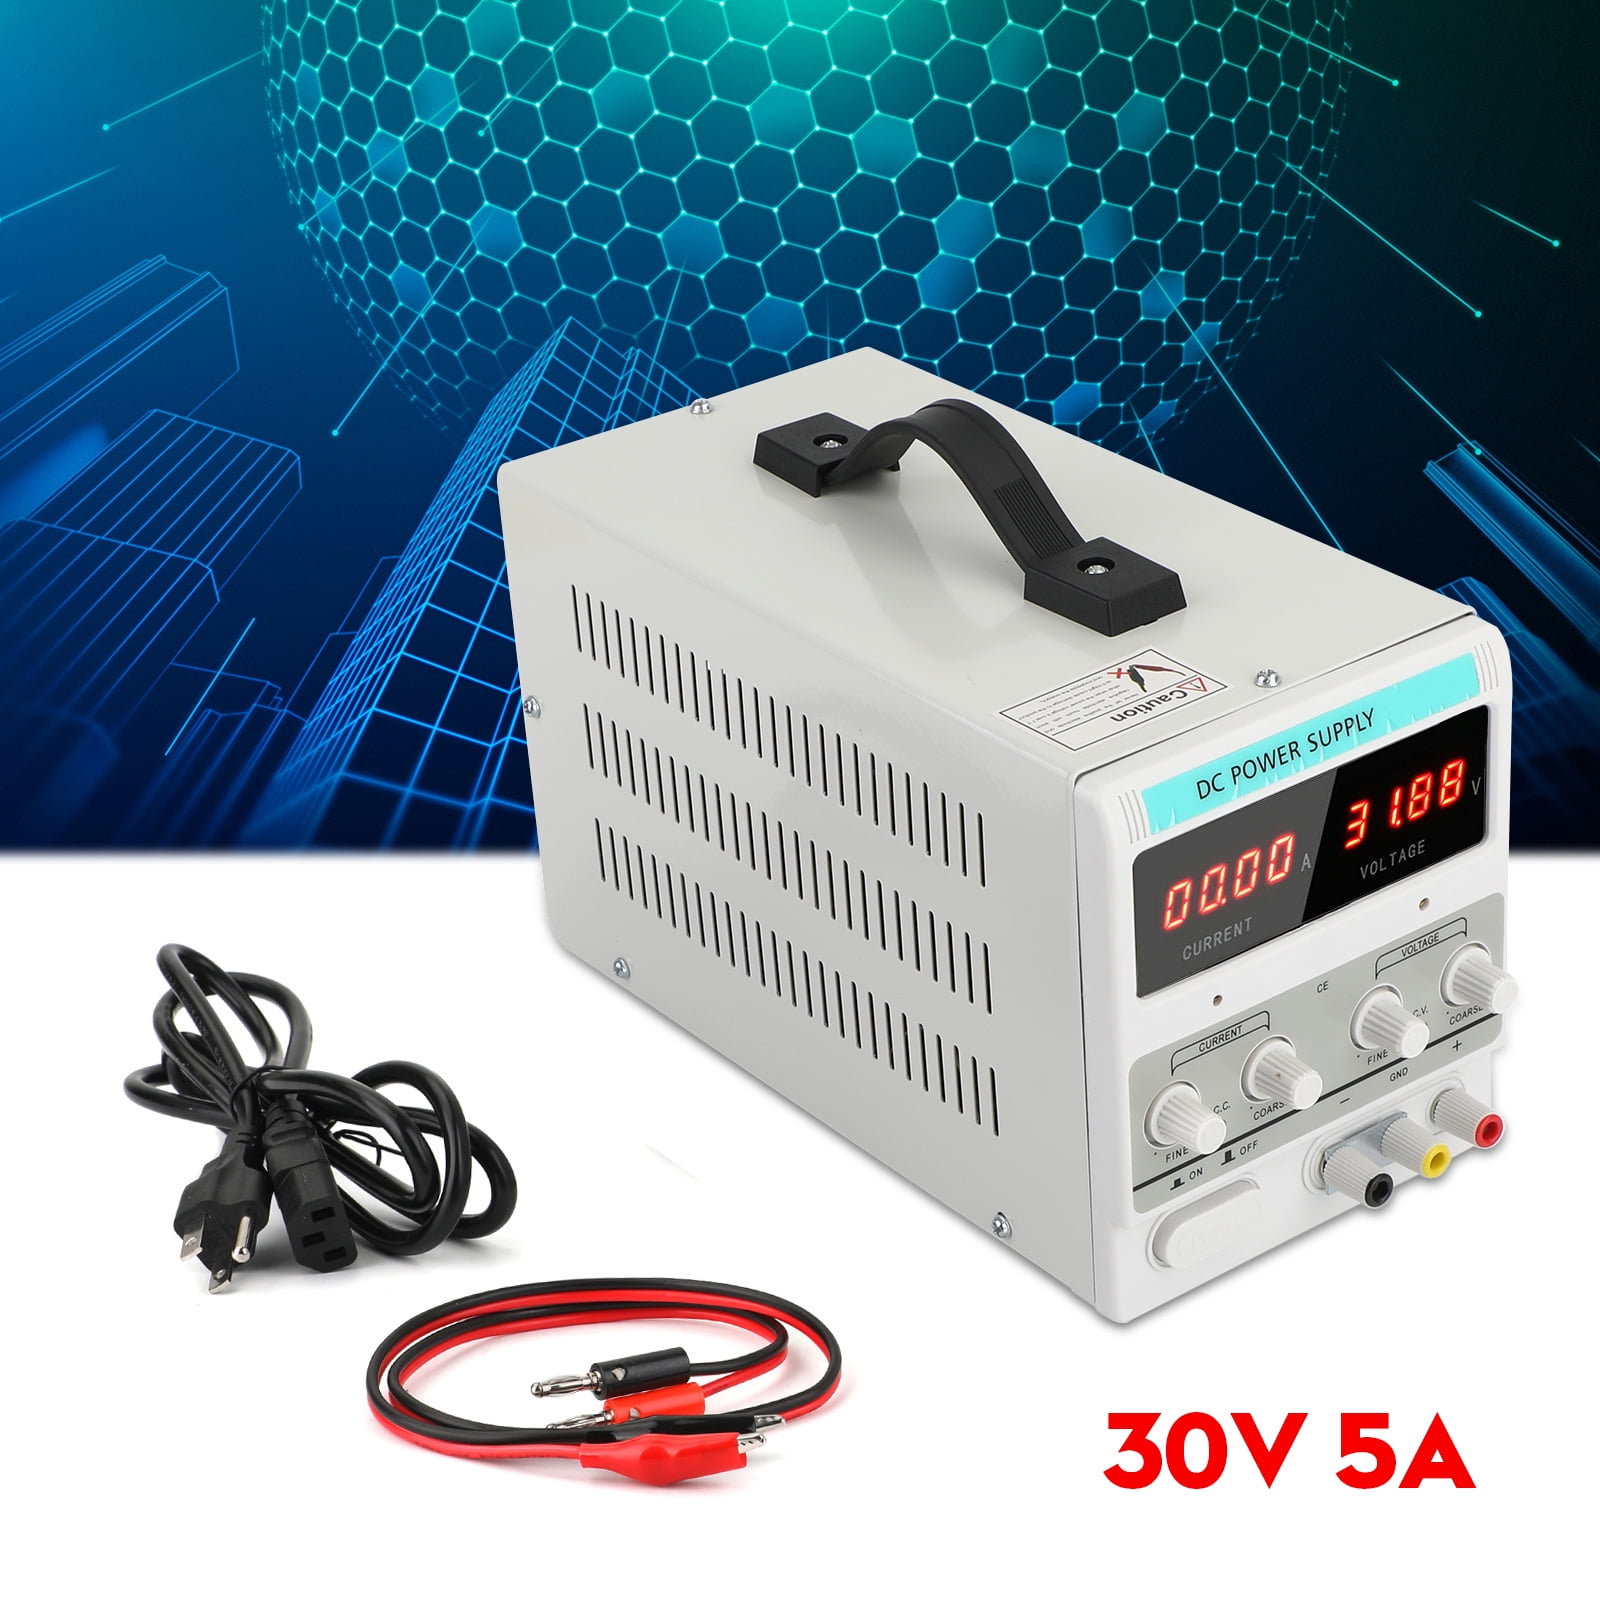 30V 5A DC Power Supply Precision Variable Dual LED Digital Lab Test with Fan 